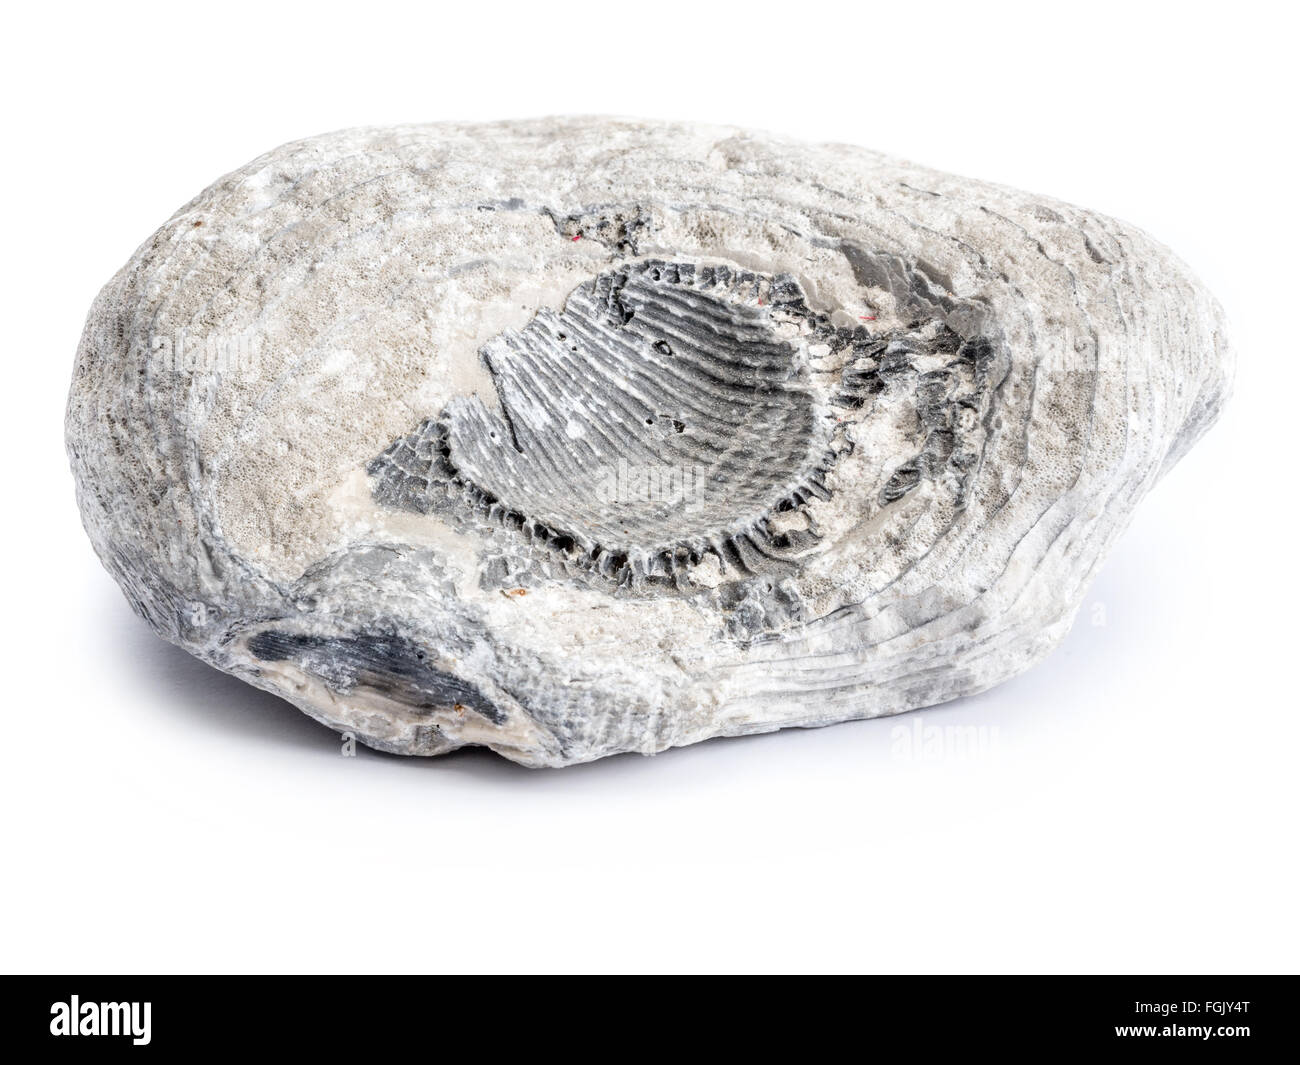 Fossil of Cretaceous period shot on white background Stock Photo